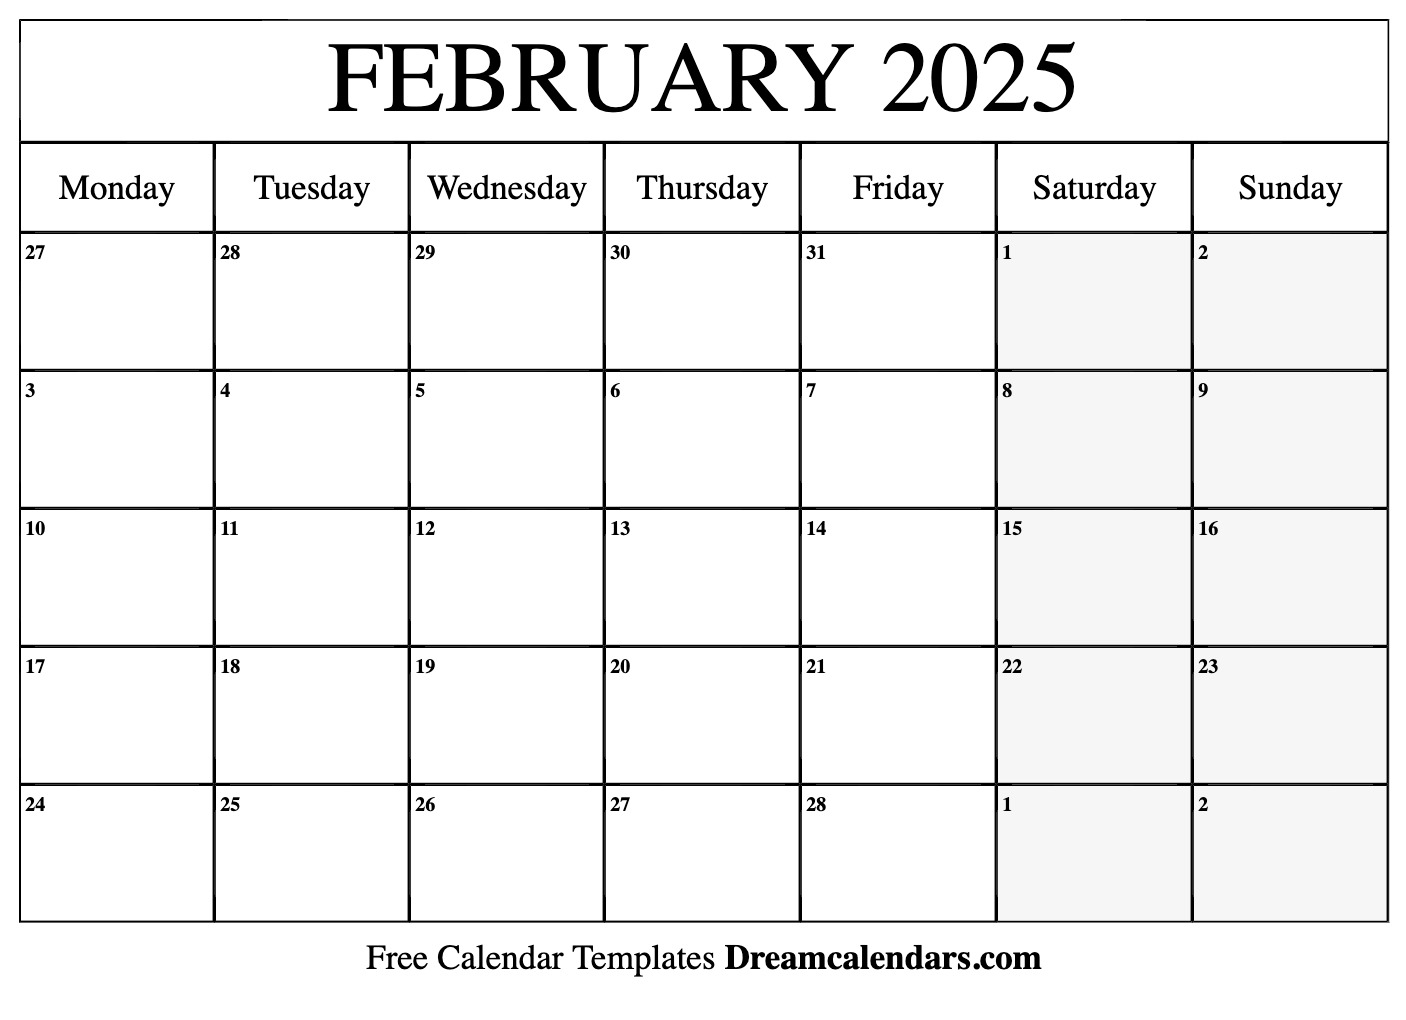 February 2025 Calendar Free Printable with Holidays and Observances